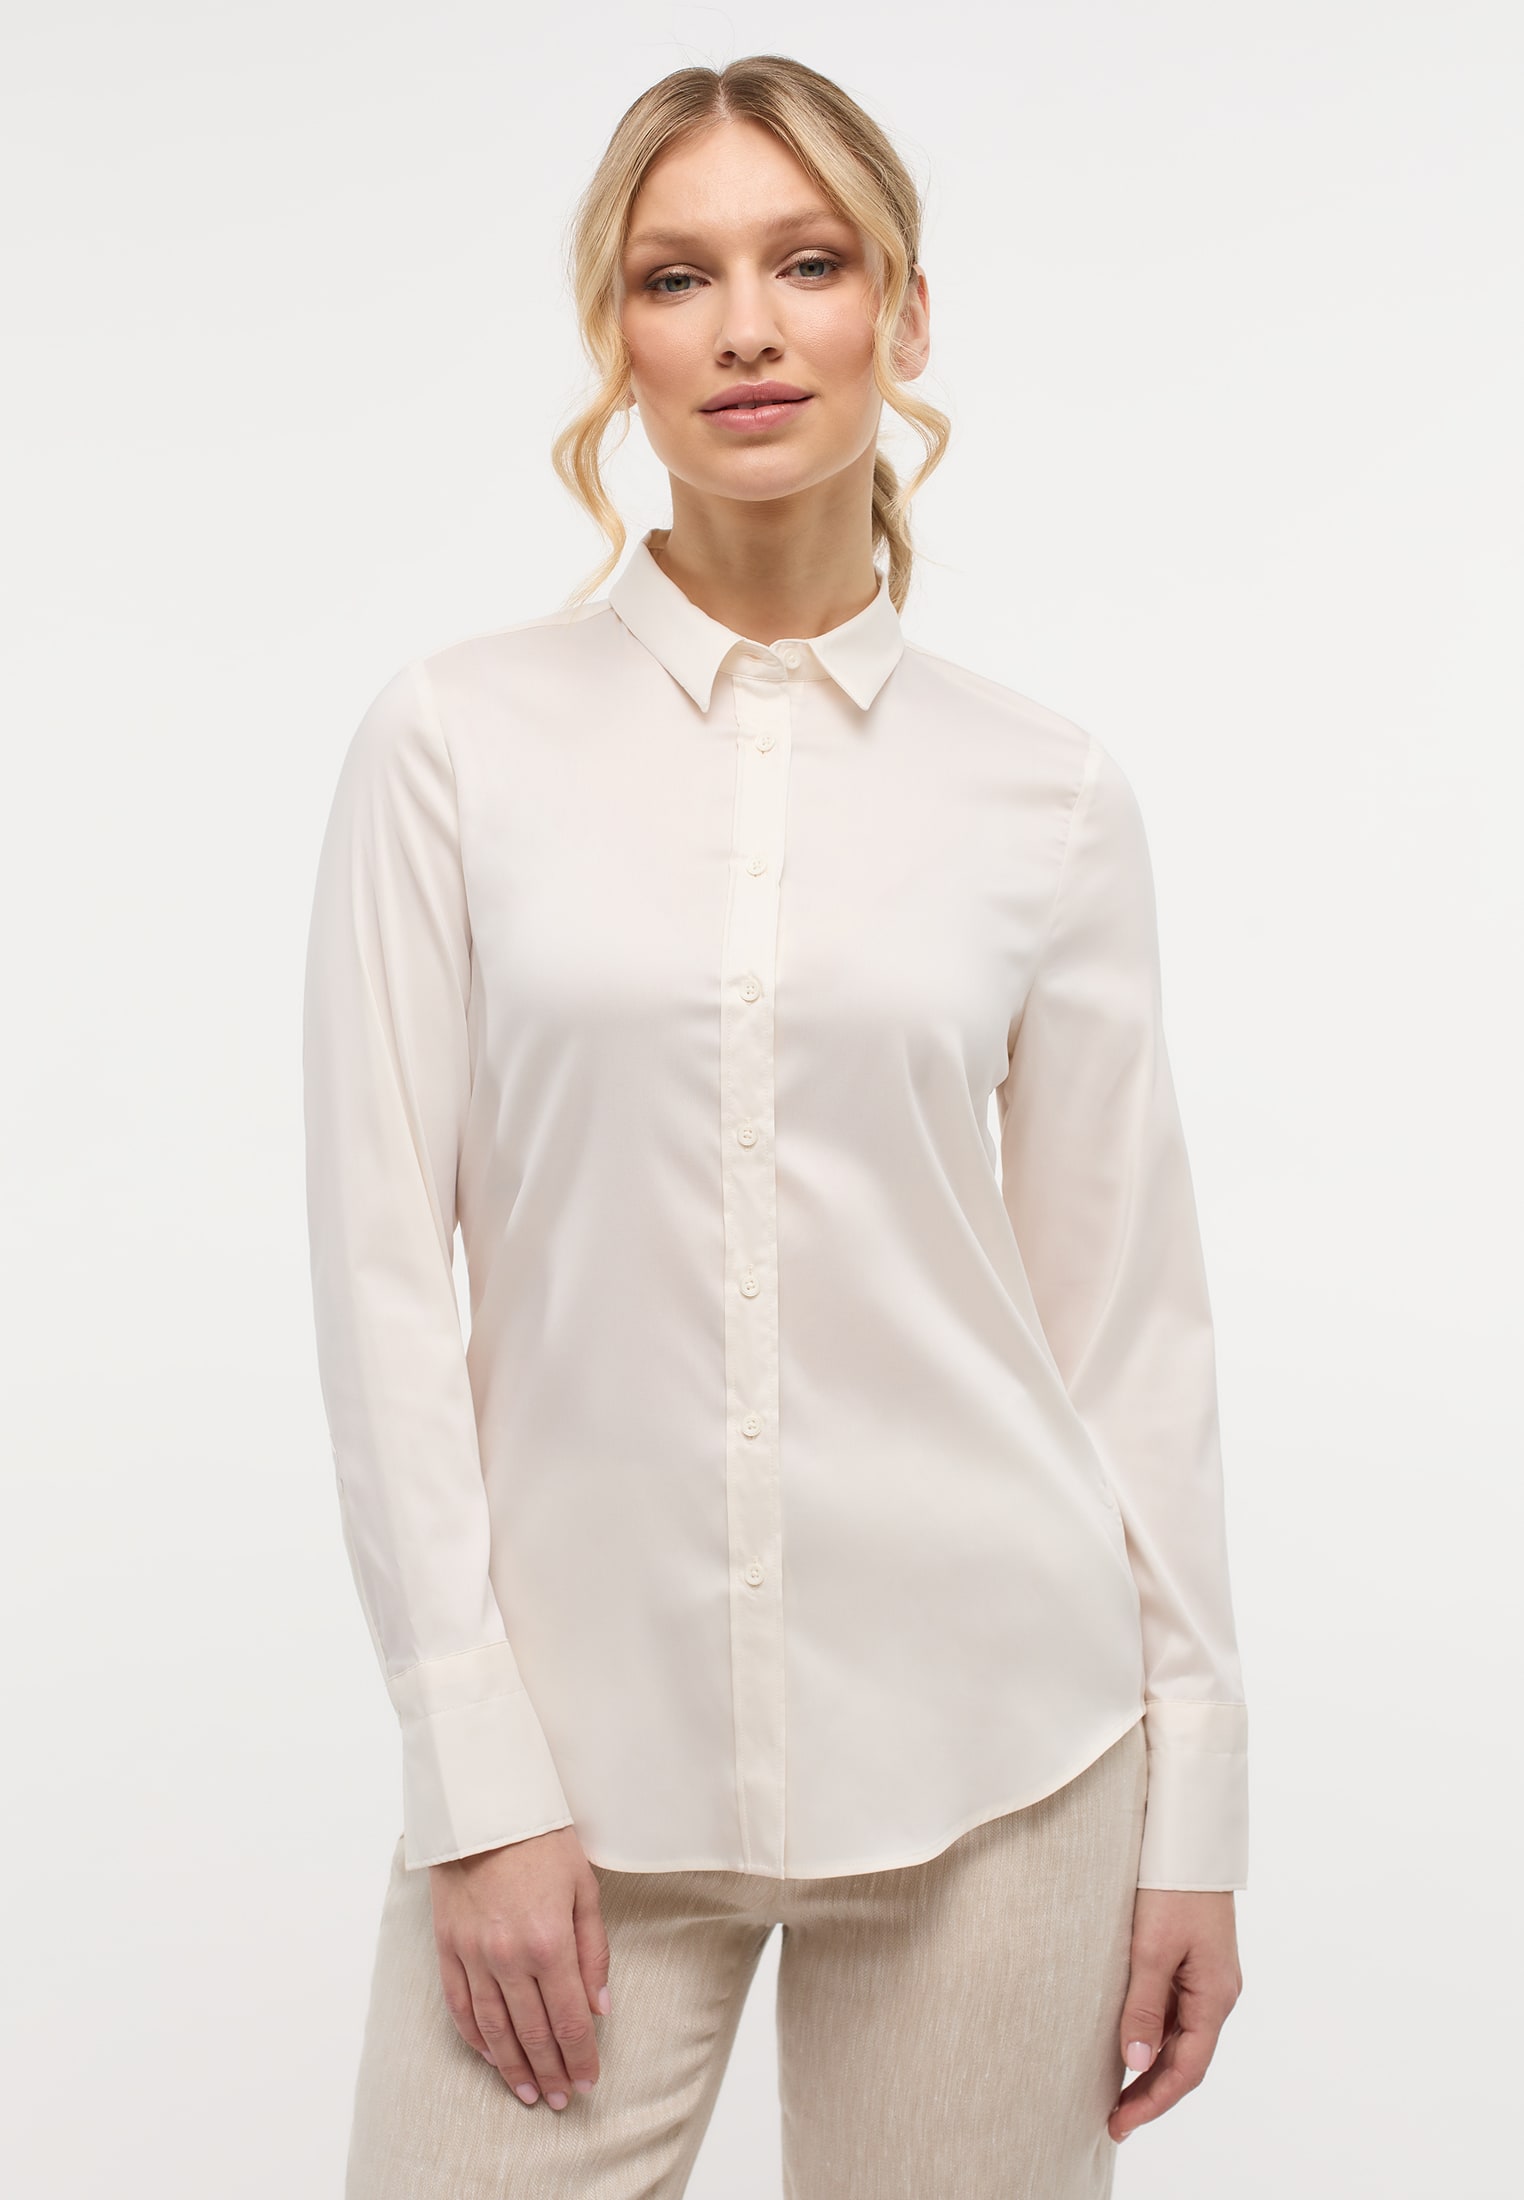 Performance Shirt 38 Langarm unifarben 2BL00441-00-02-38-1/1 off-white | | in | off-white Bluse 